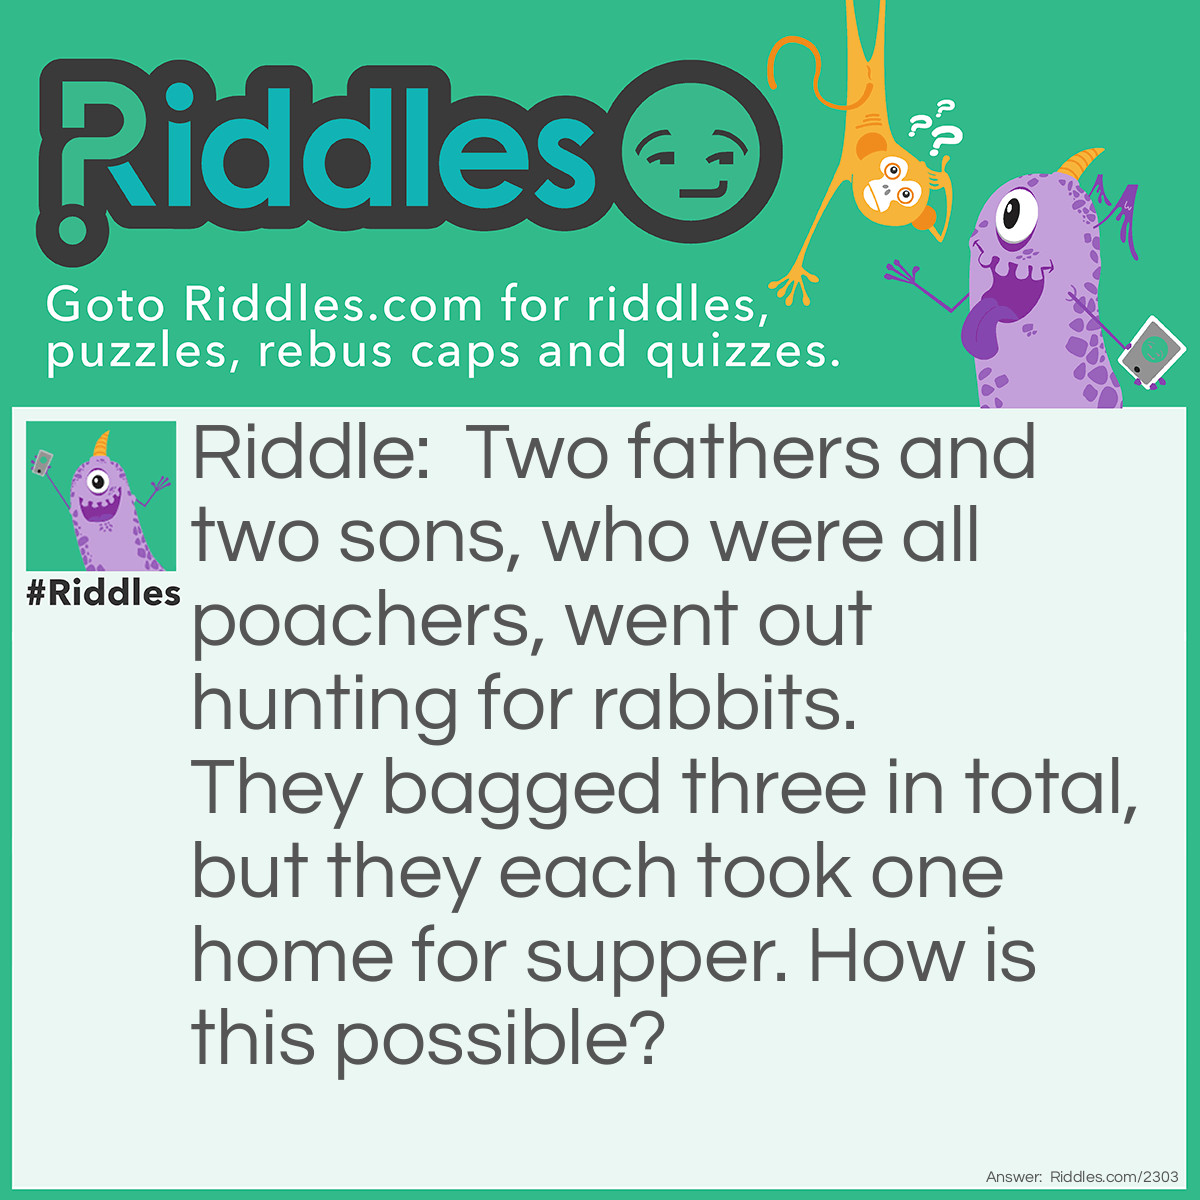 Riddle: Two fathers and two sons, who were all poachers, went out hunting for rabbits. They bagged three in total, but they each took one home for supper. How is this possible? Answer: There were three poachers, a grandfather, a father, and his son.